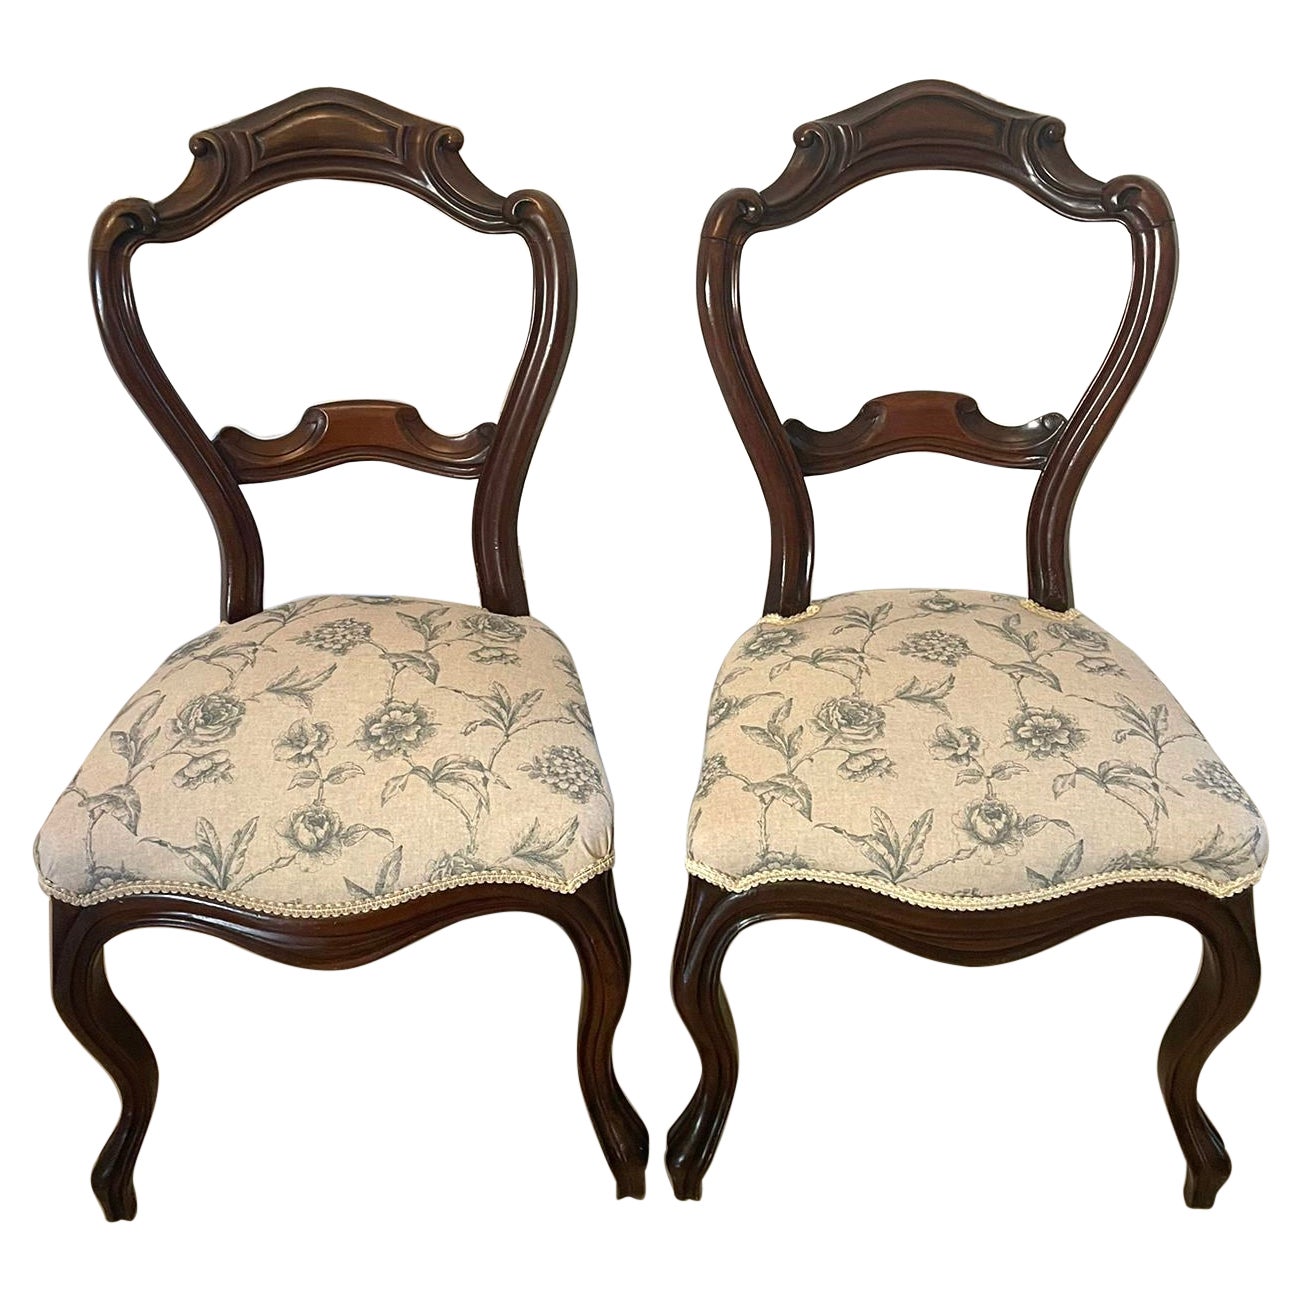  Pair of Antique Victorian Quality Walnut Side Chairs 